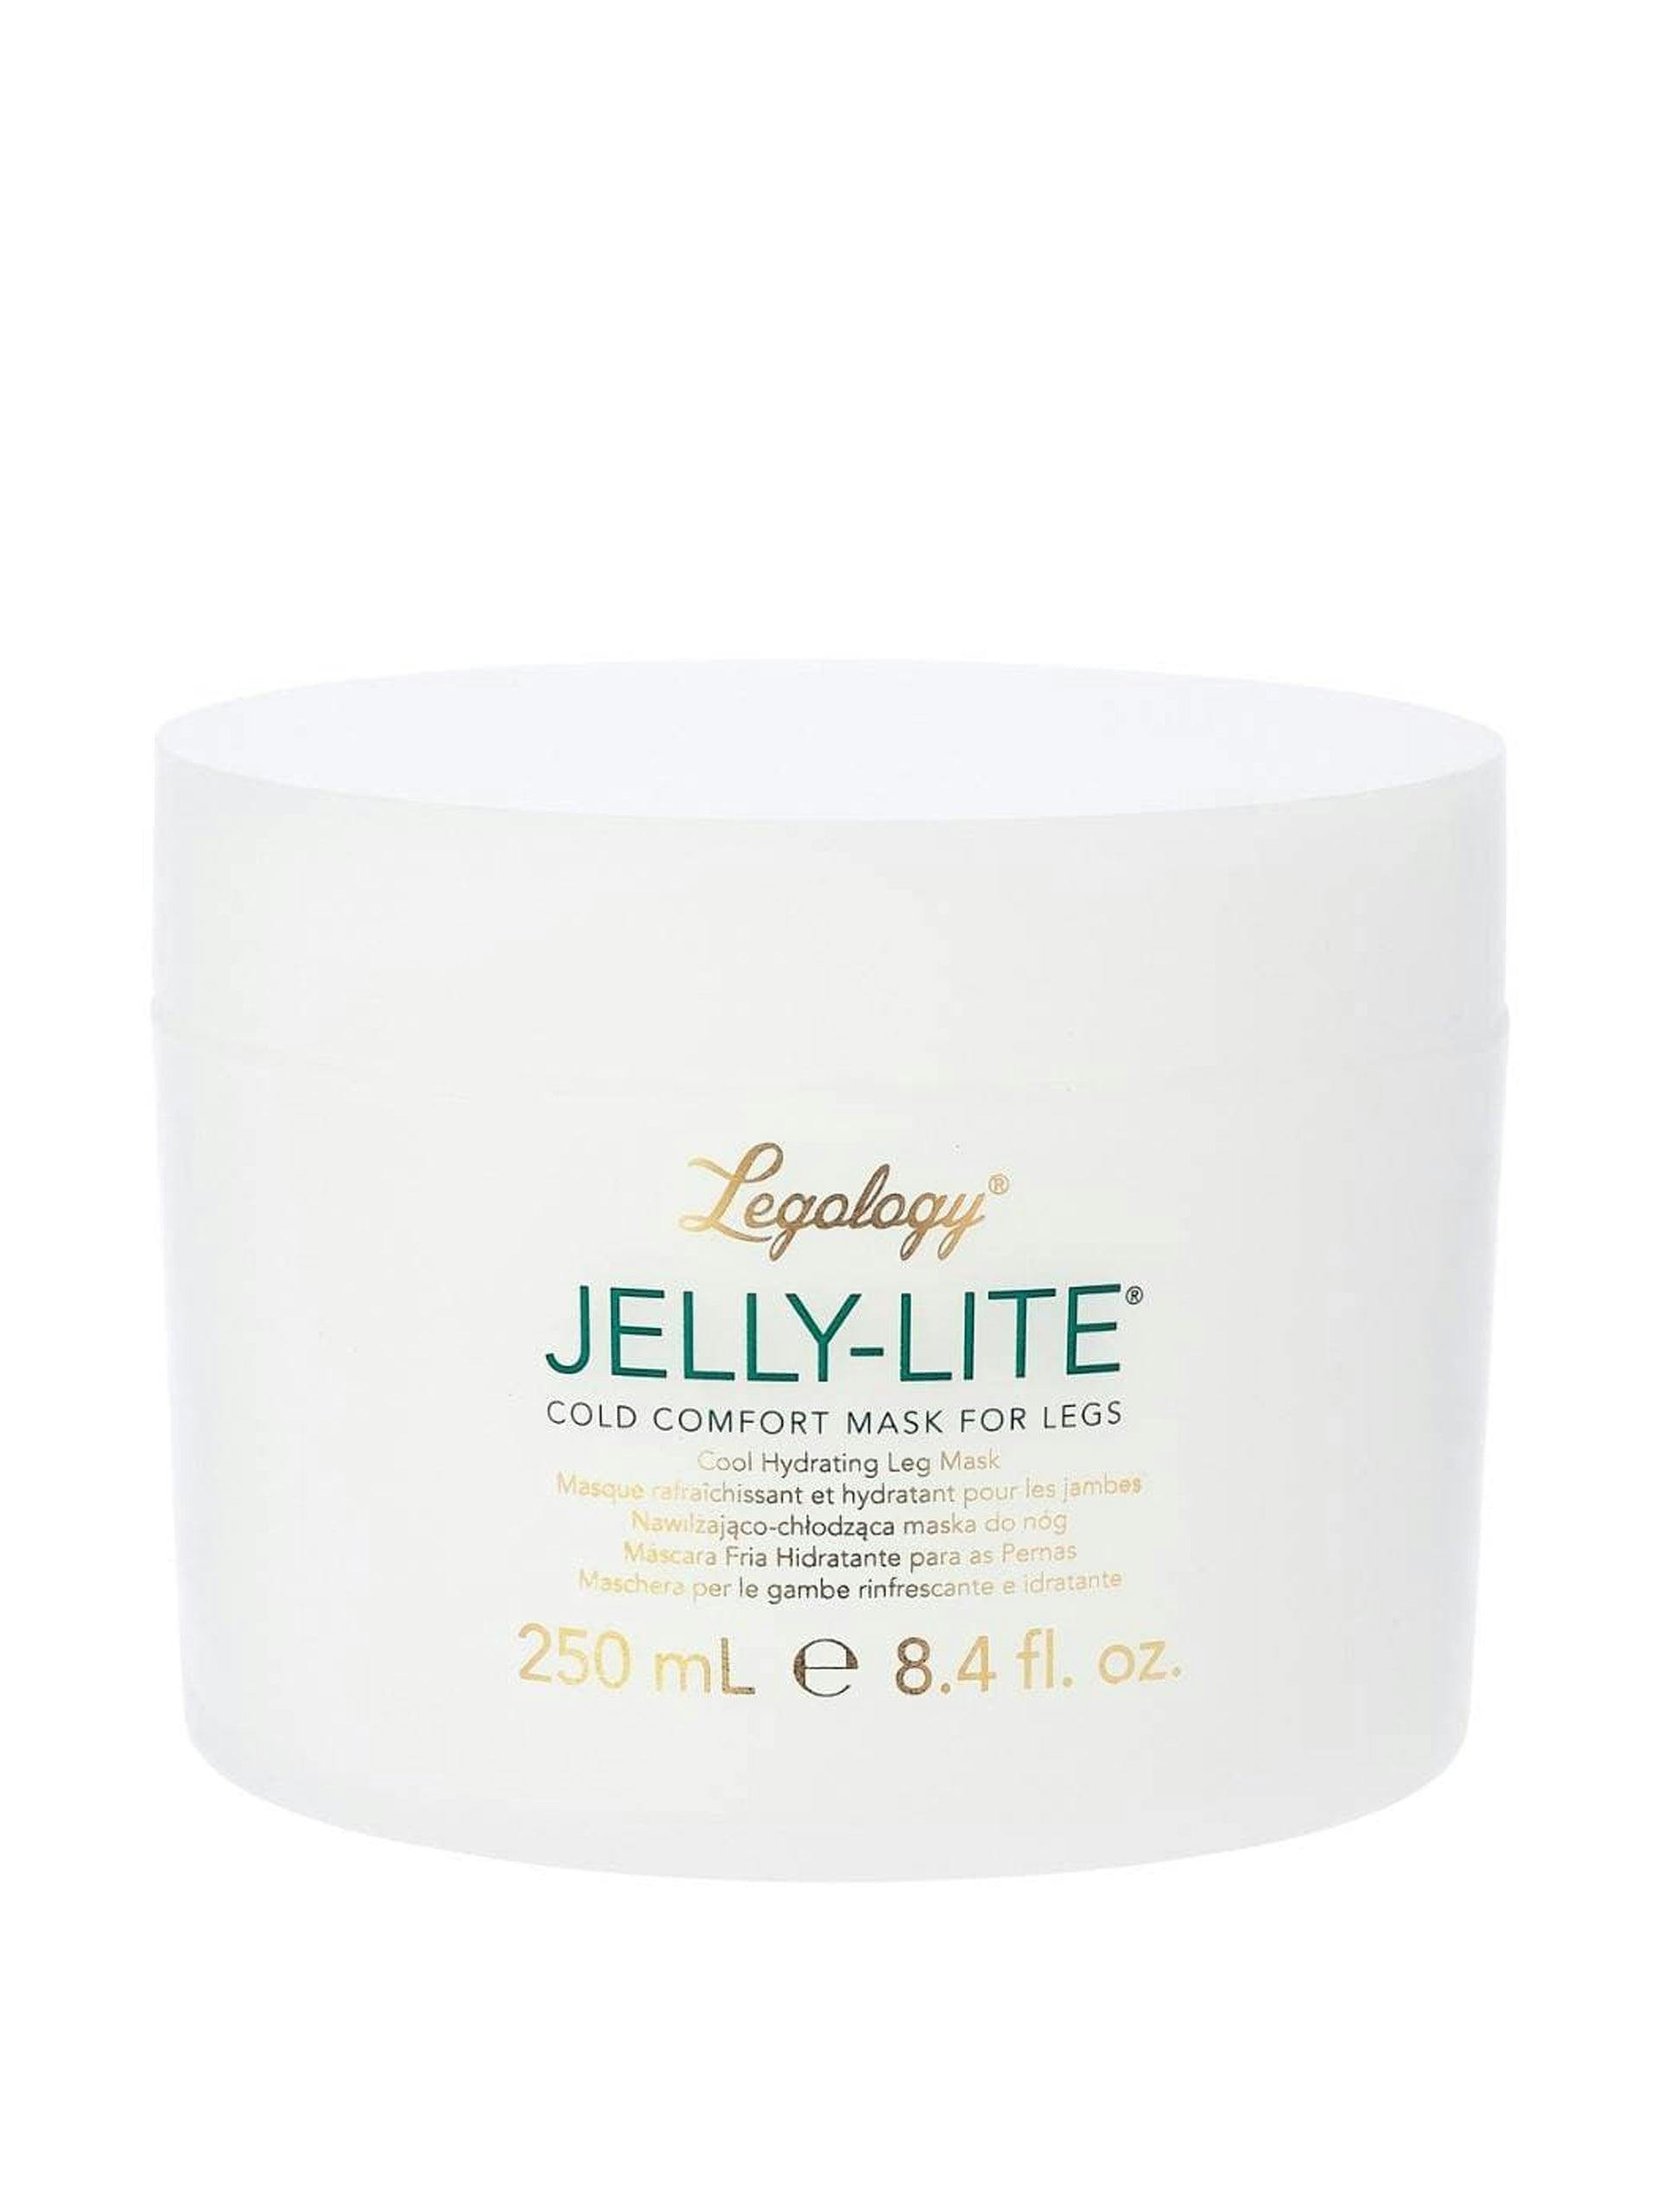 Jelly-Lite cooling hydrating leg mask